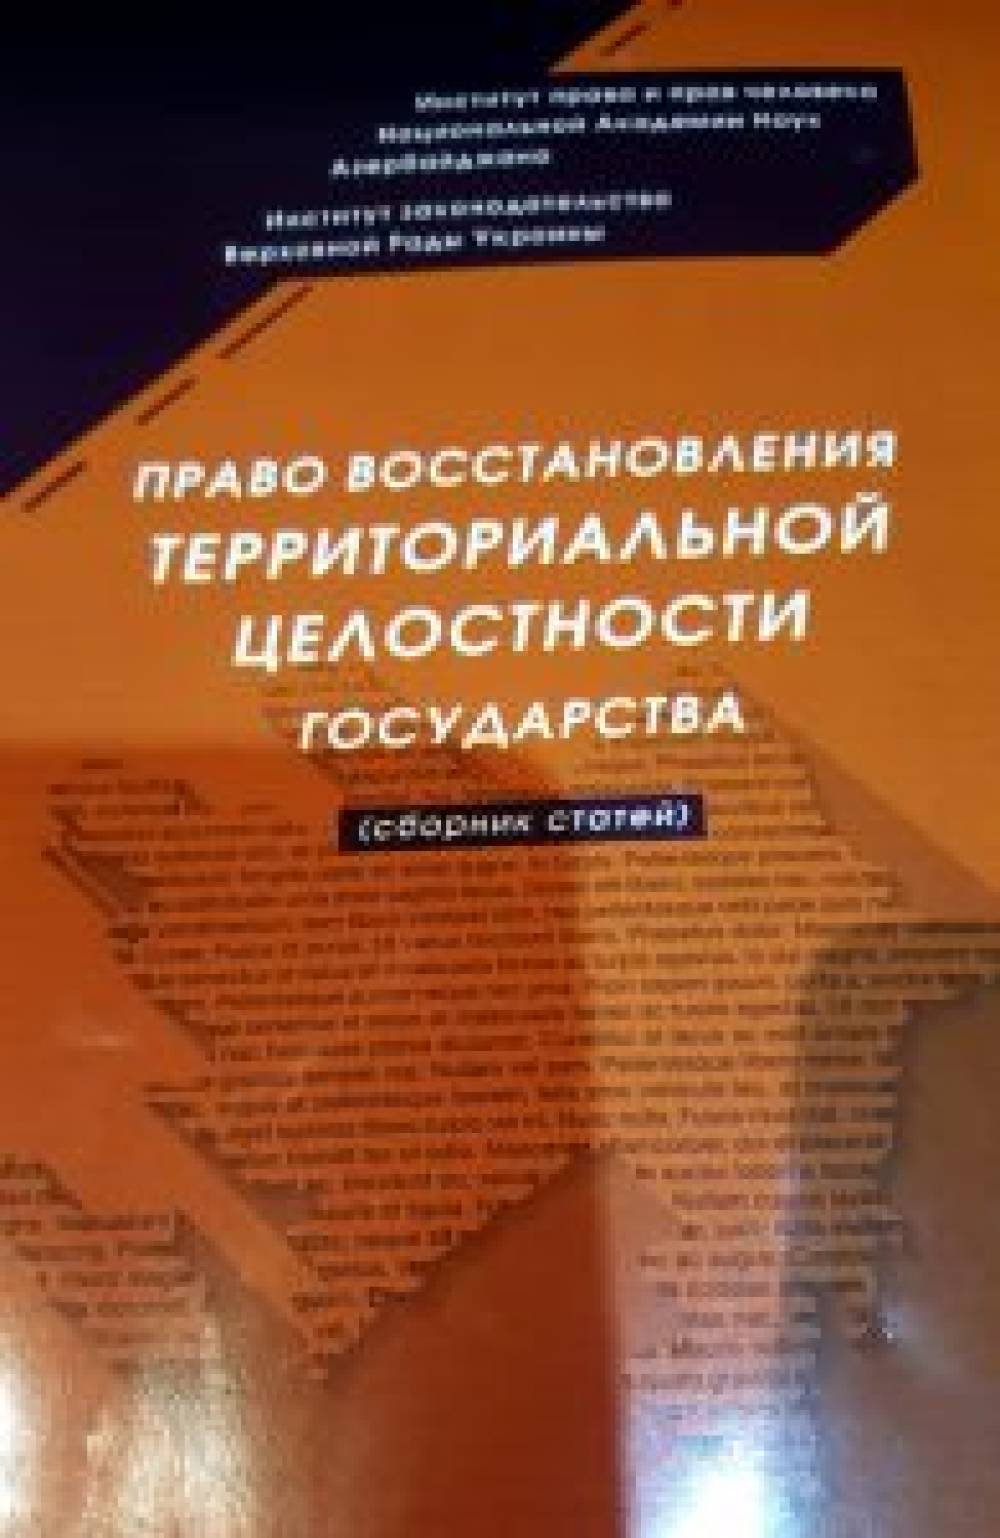 A new book “The Right to Restore Territorial Integrity of the State” was published